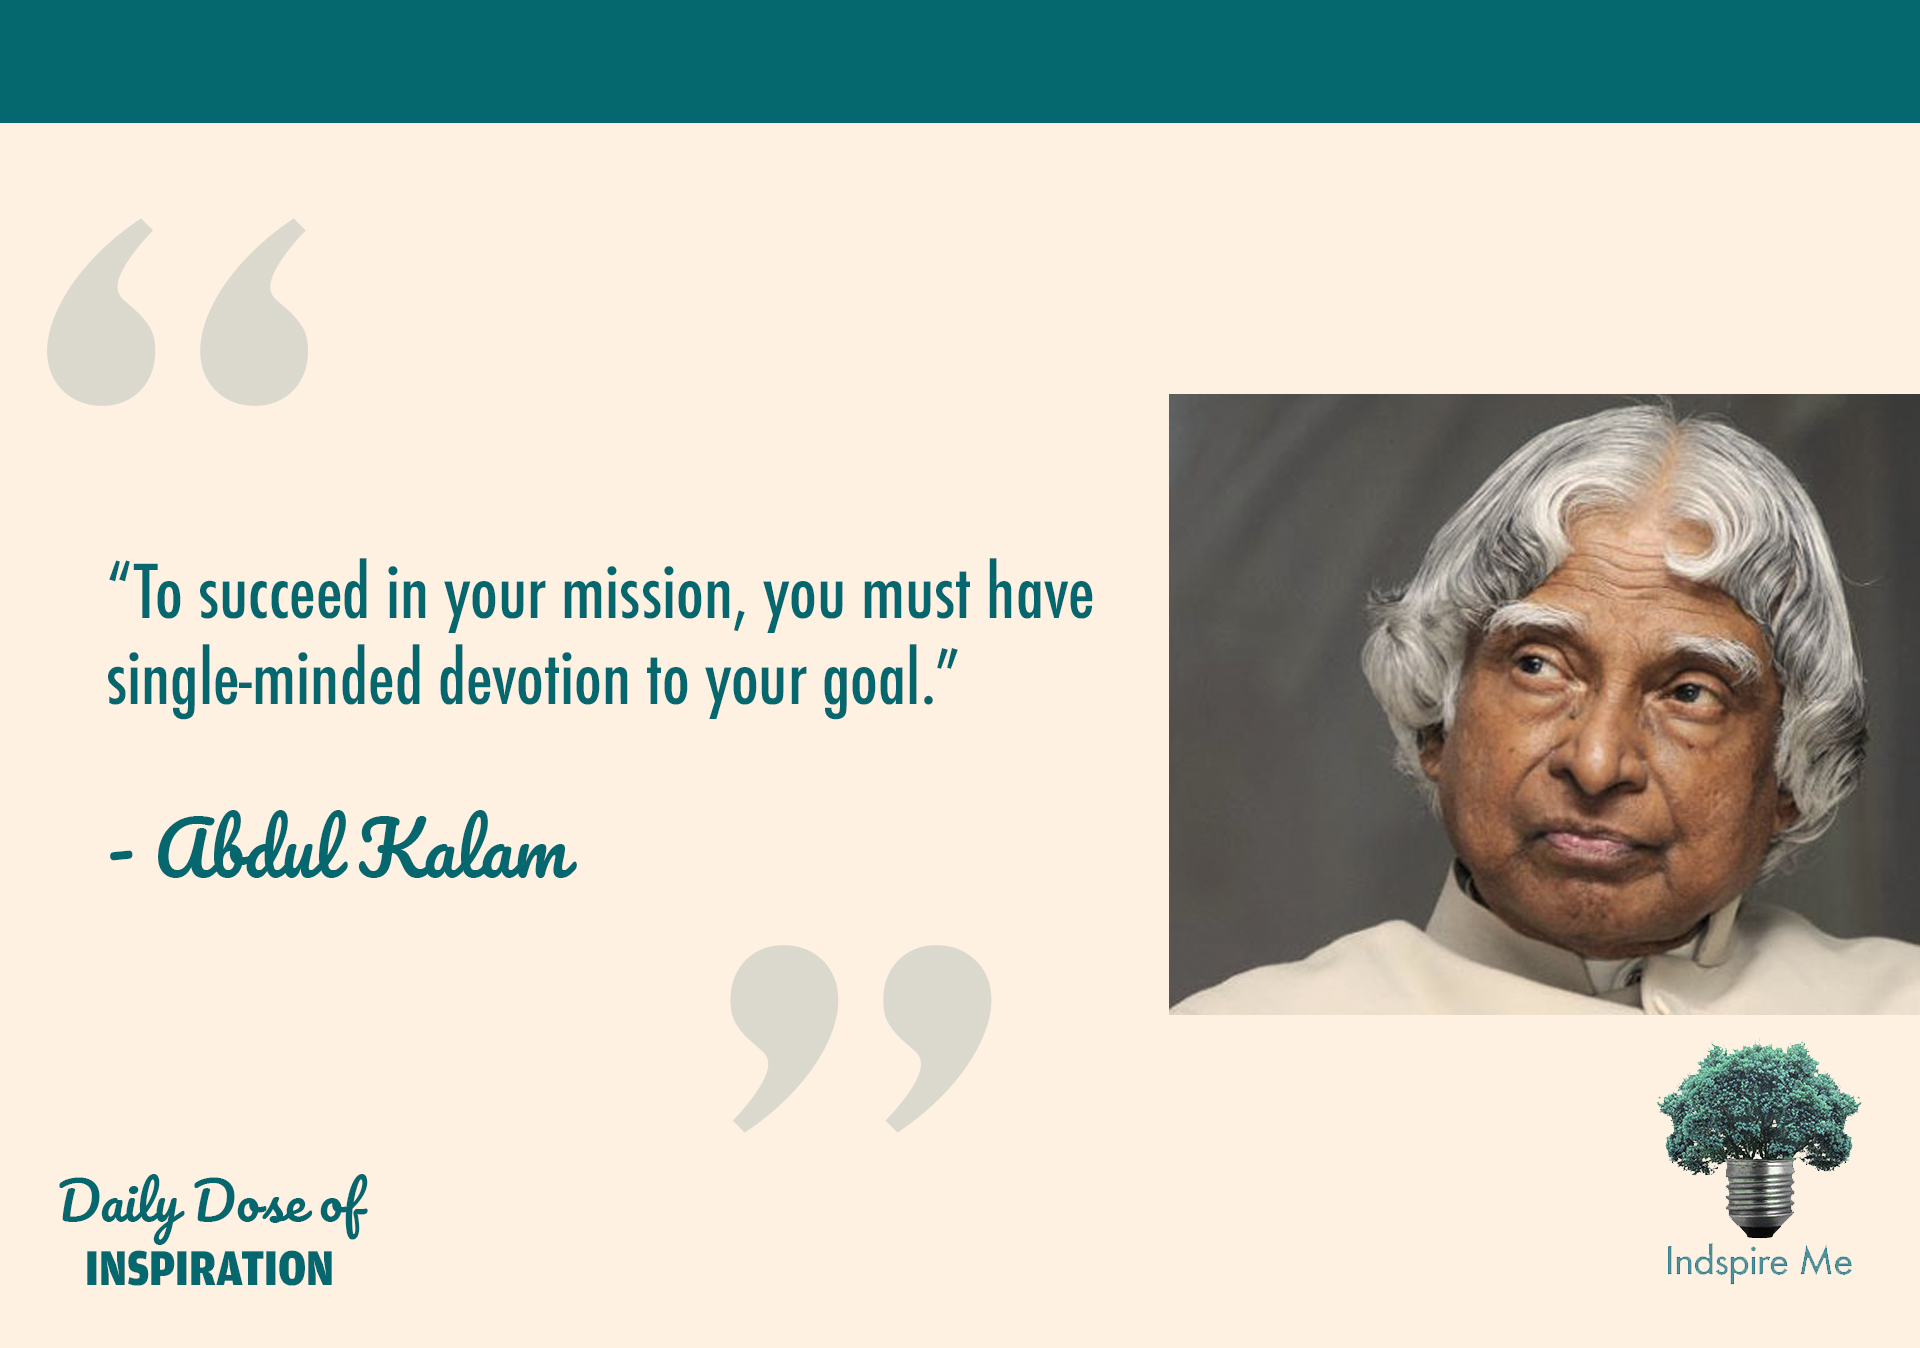 Quote by an Inspiring Indian: The Late Dr APJ Abdul Kalam - Indspire Me